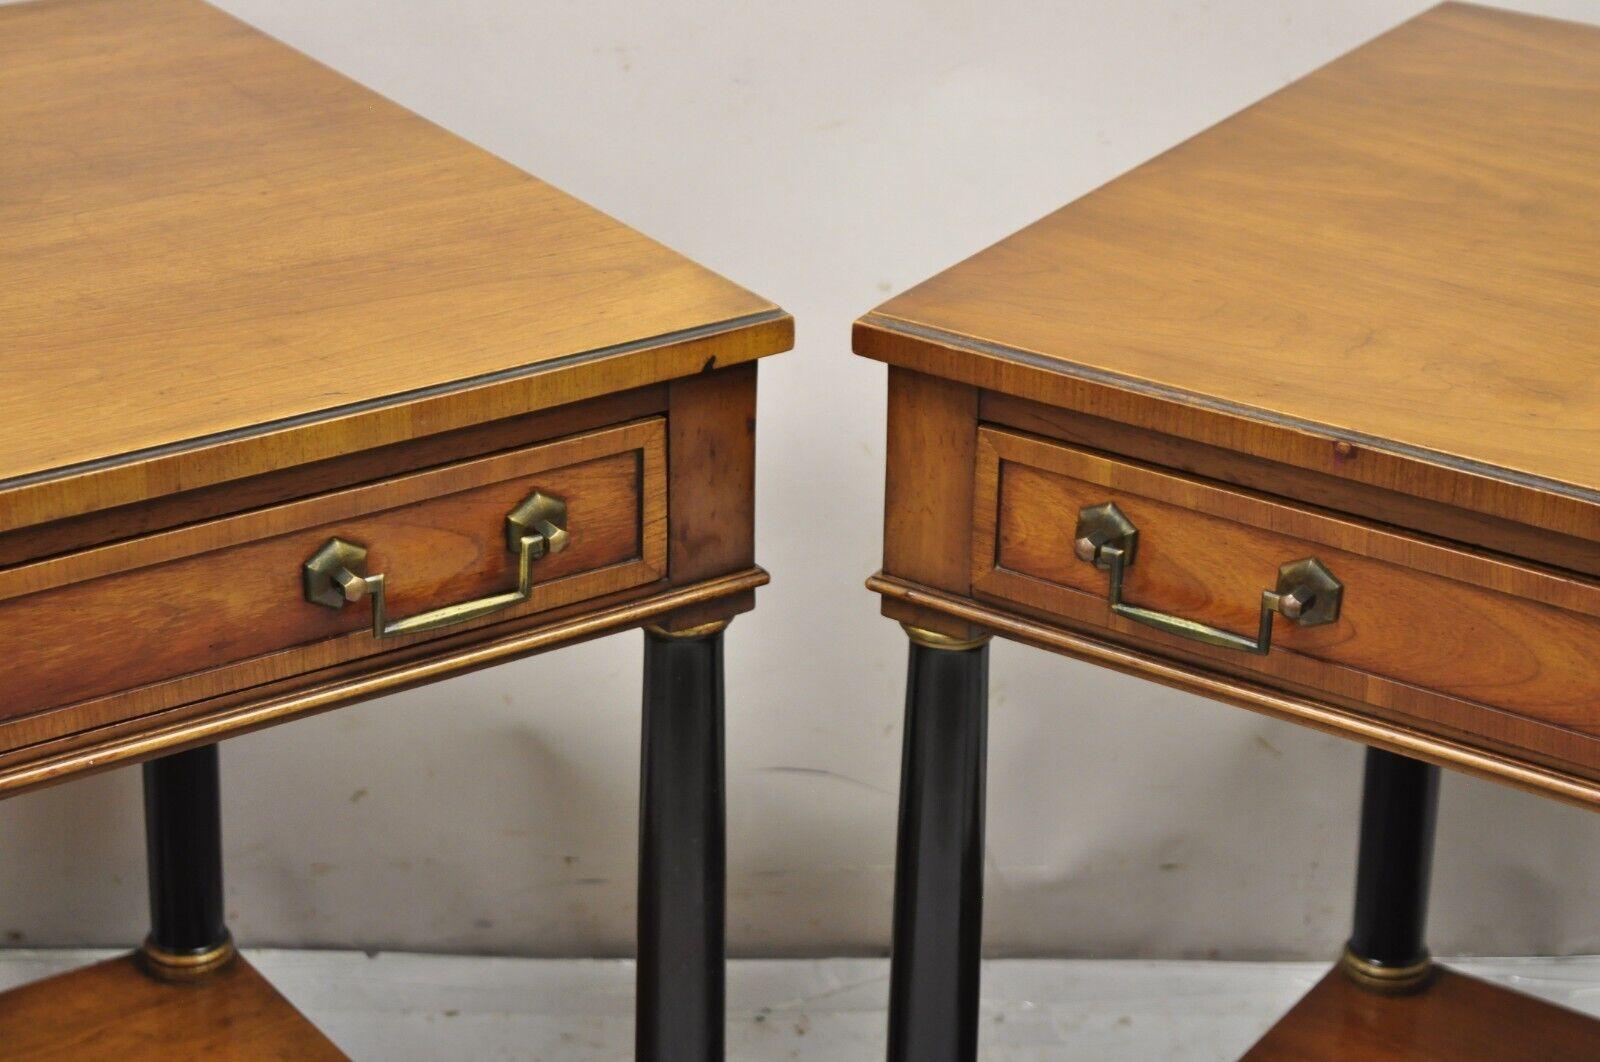 20th Century Century French Empire Style Cherry Wood Black Column 1 Drawer End Tables - Pair For Sale